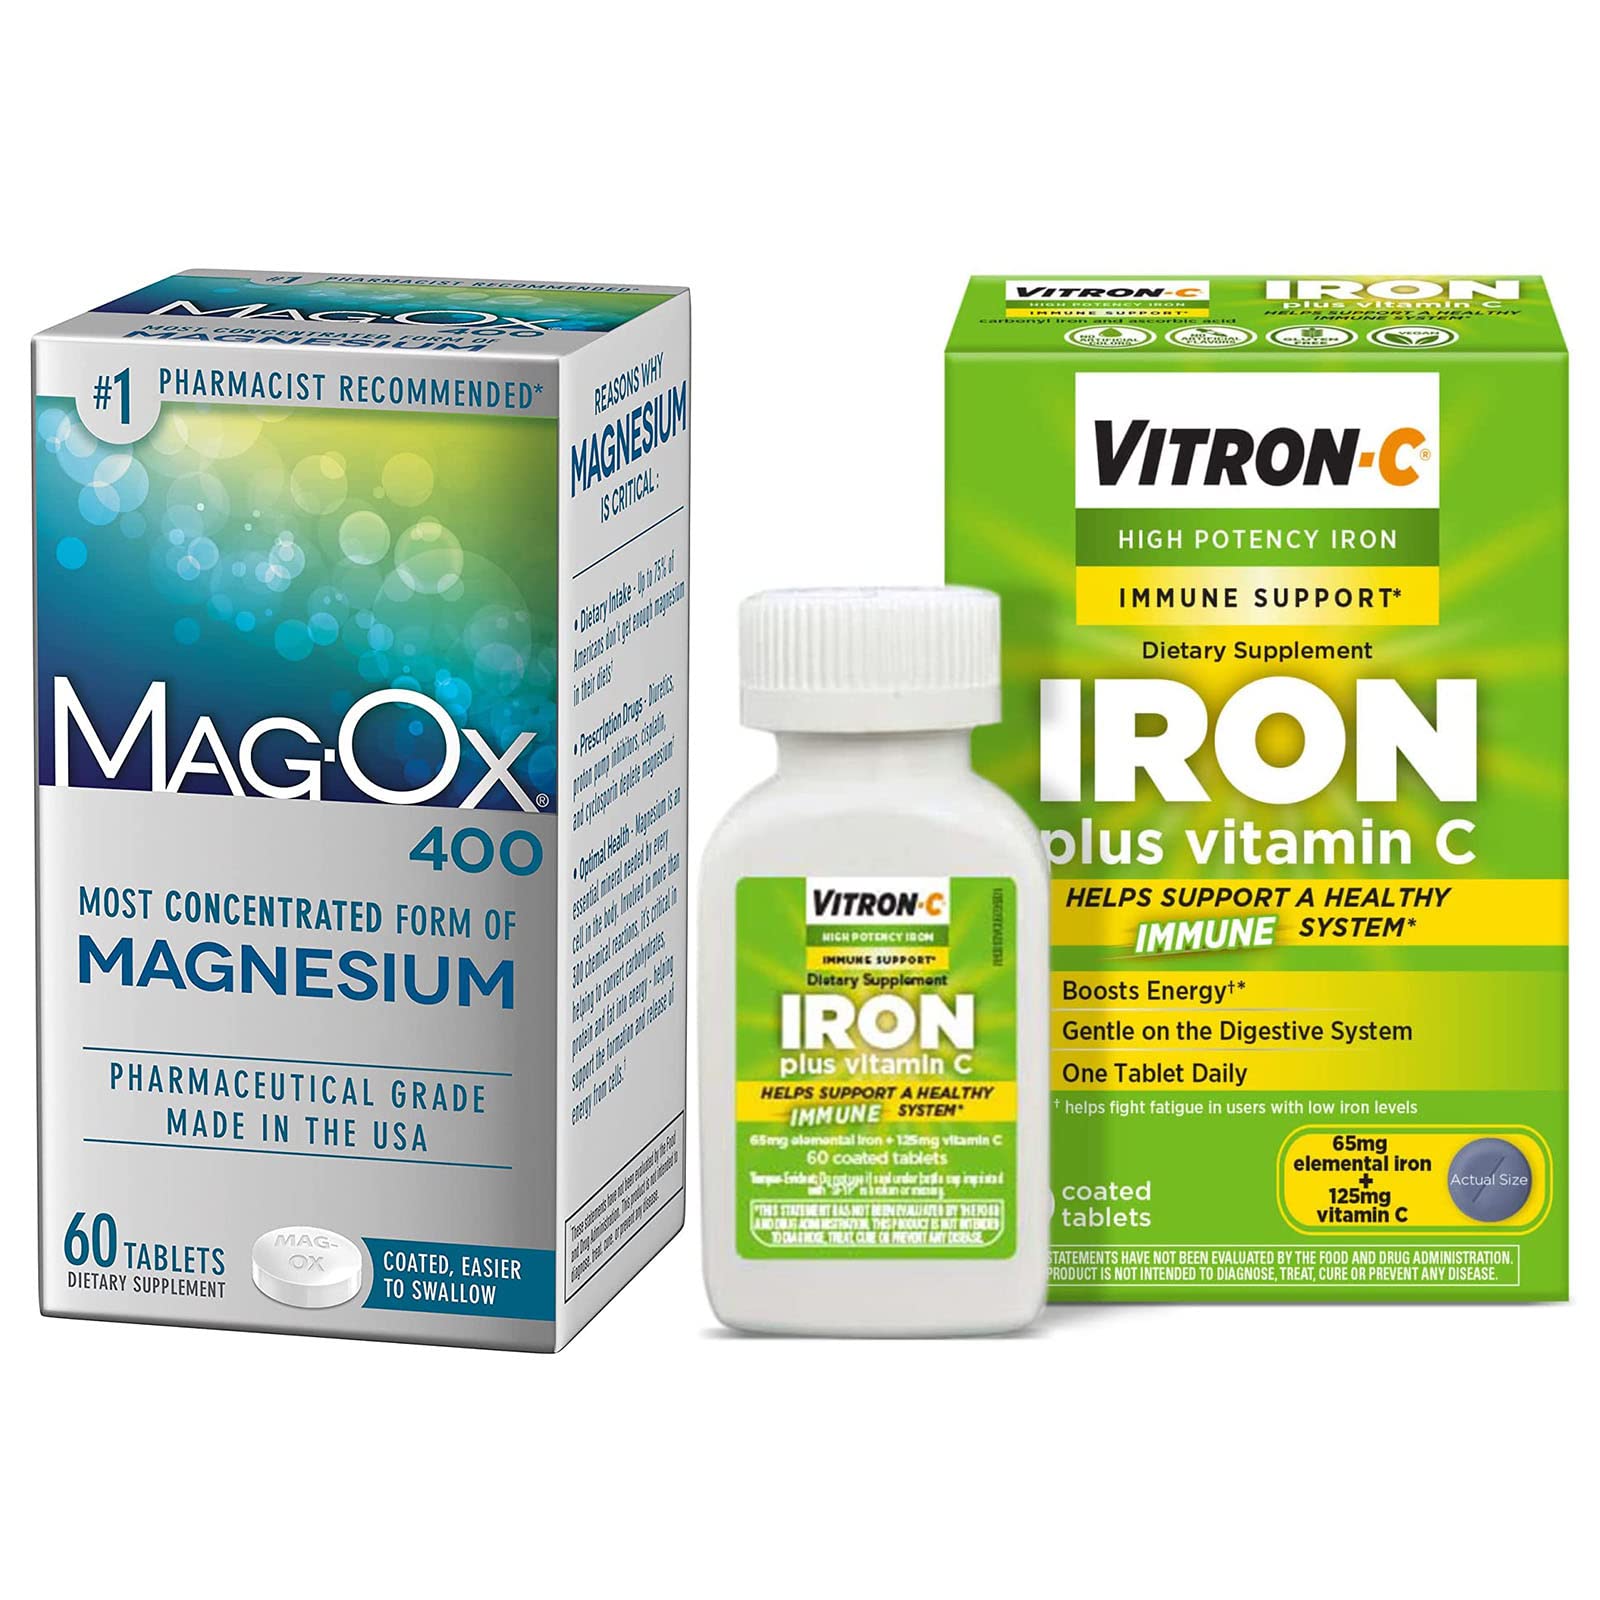 Vitron-C High Potency Iron Supplement, Immunt Support 60ct and Mag-Ox 400 Magnesium Mineral Supplement 60ct